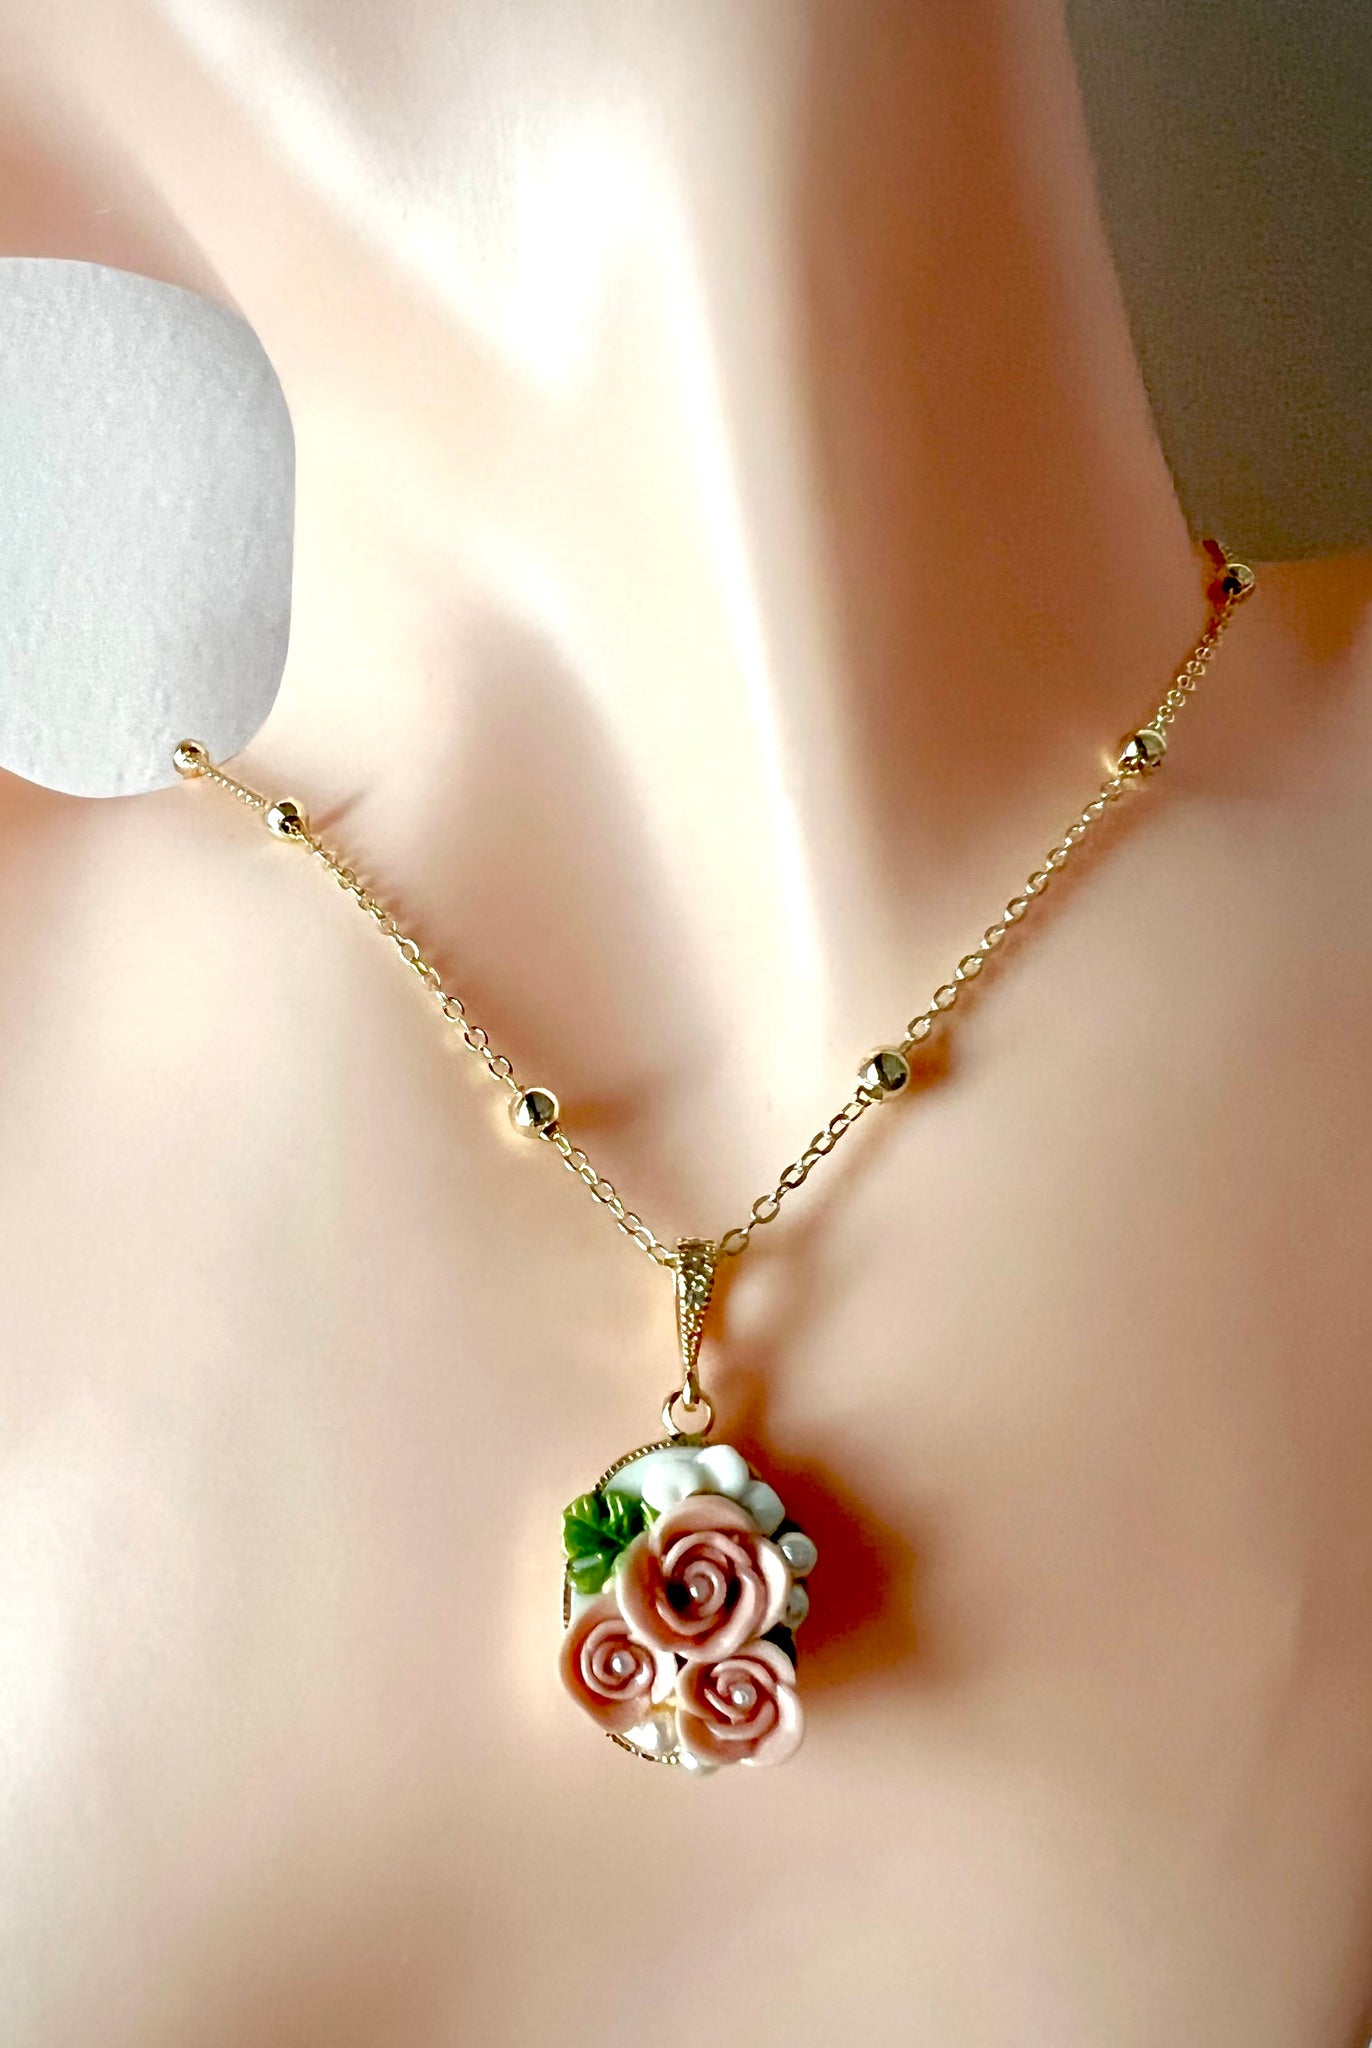 The Rose Pendant Necklace